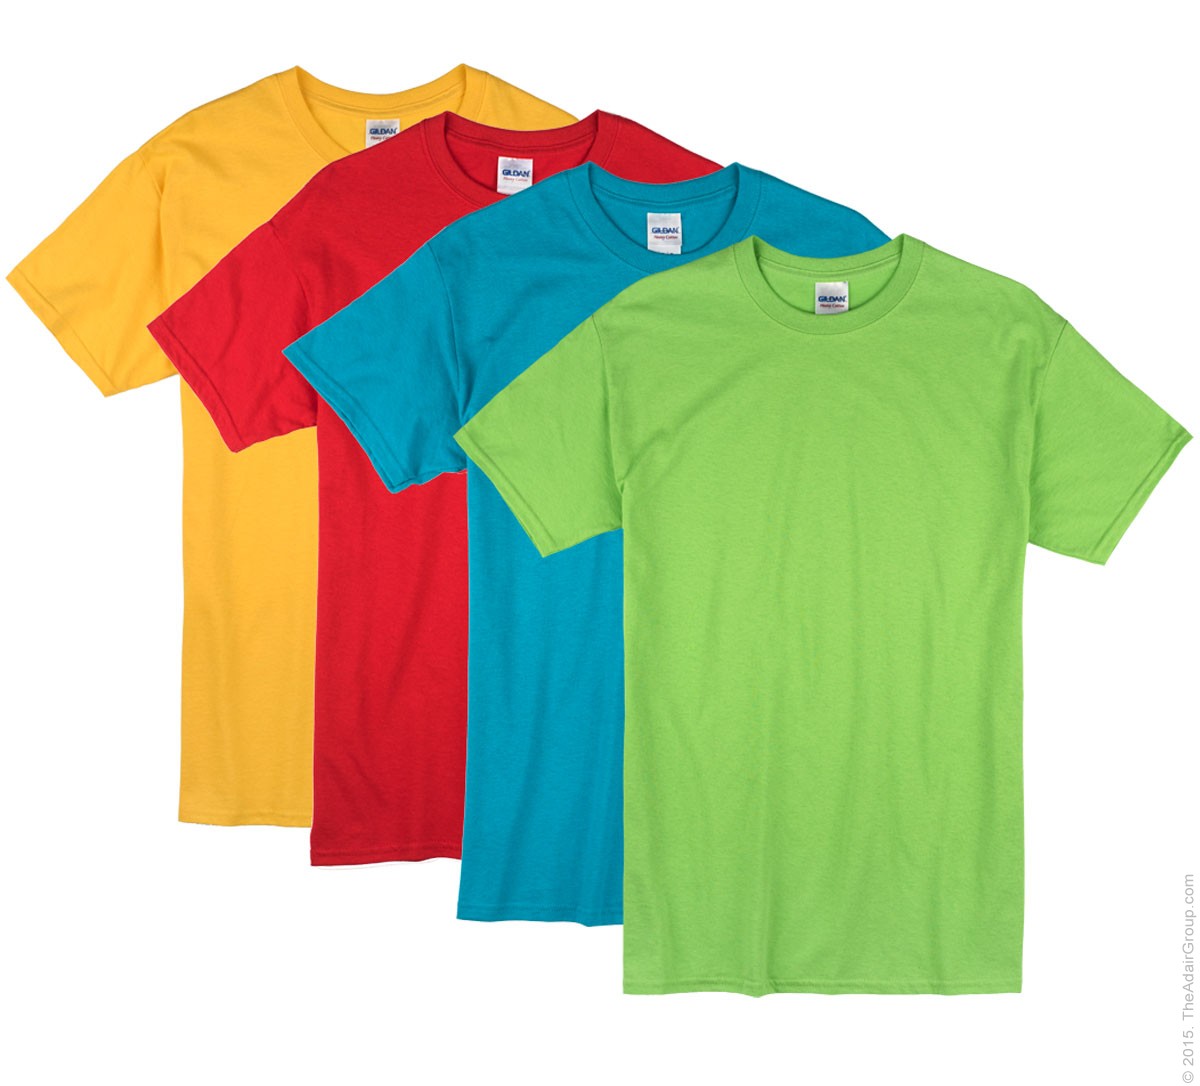 assorted t-shirts